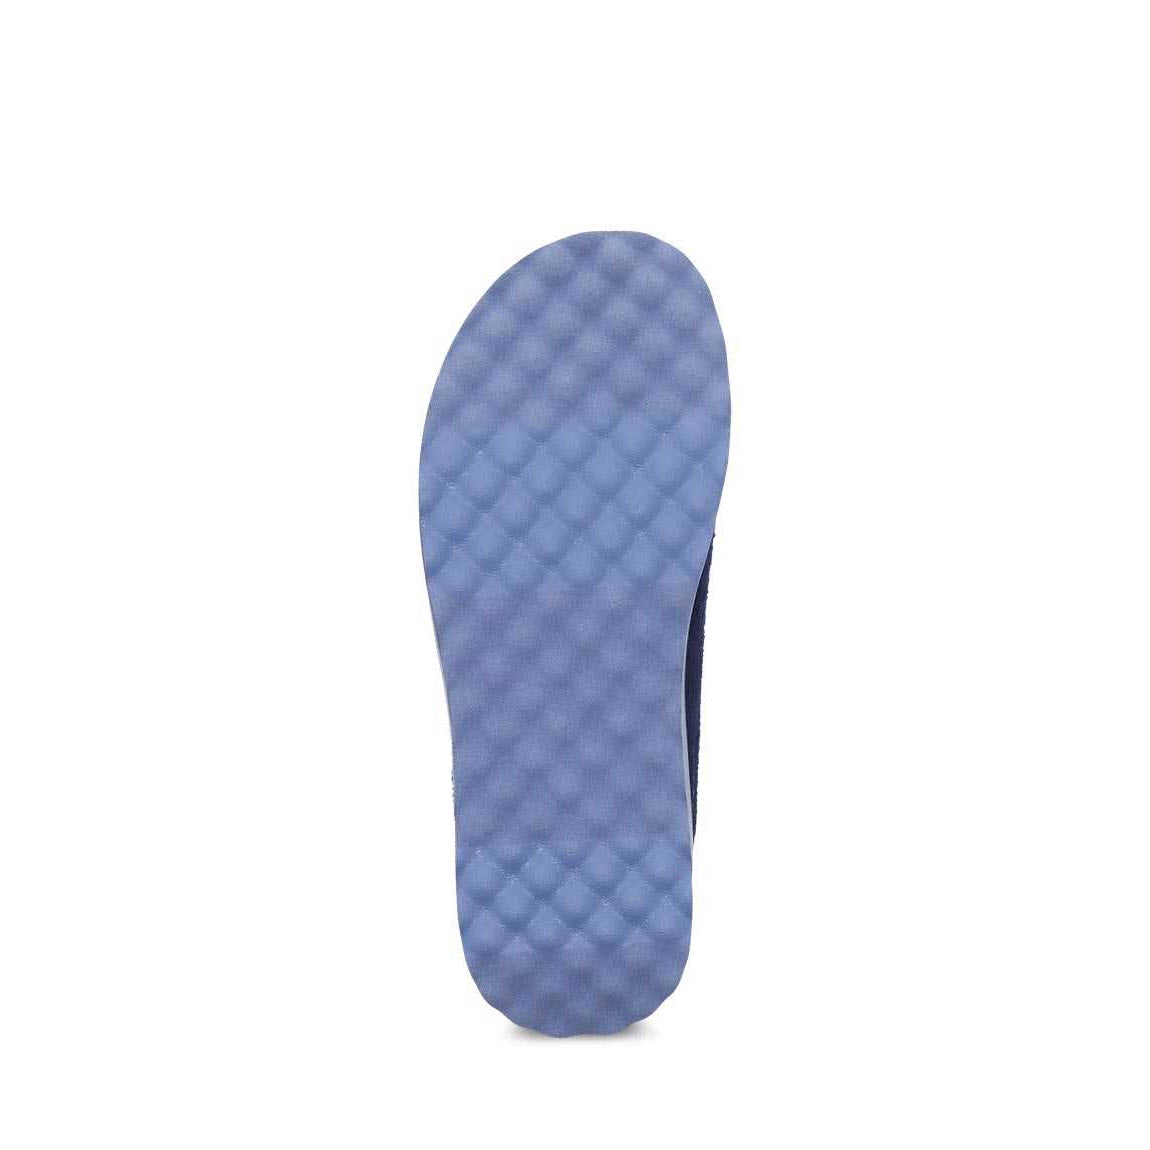 Dansko navy wool shoe insole with arch support and a diamond pattern texture.